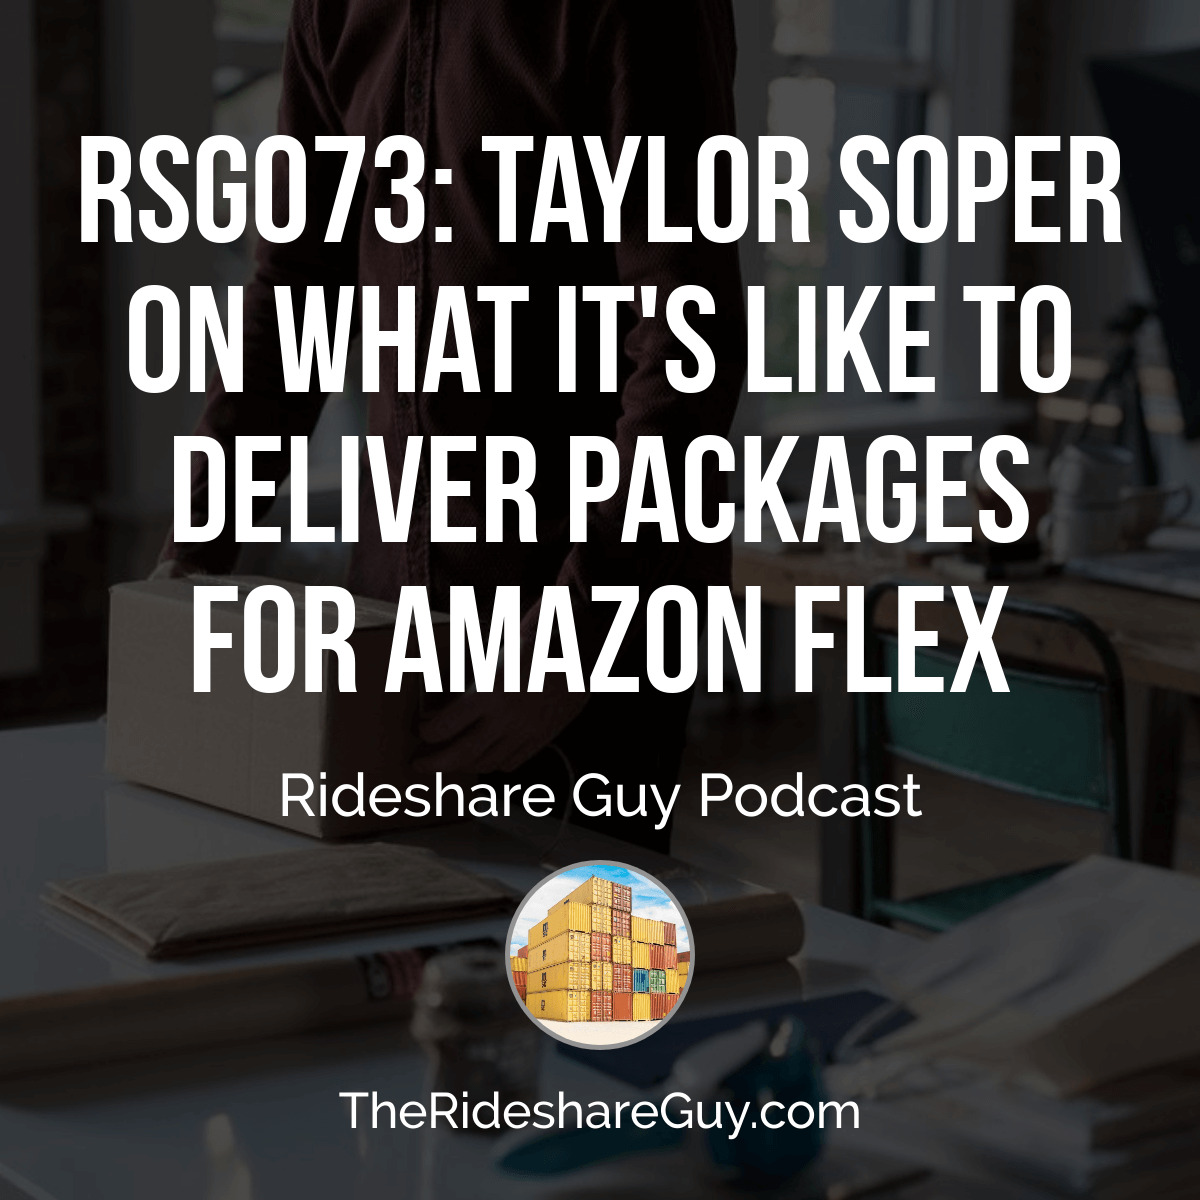 Have you ever wondered how Amazon Flex works? Are you paid hourly, what's the wear and tear on your vehicle like, and what's up with drones? Today, I talk with Taylor Soper of GeekWire about his undercover experience working for Amazon Flex. We'll cover how much you can expect to make, what the pros and cons are, and more in this podcast episode!